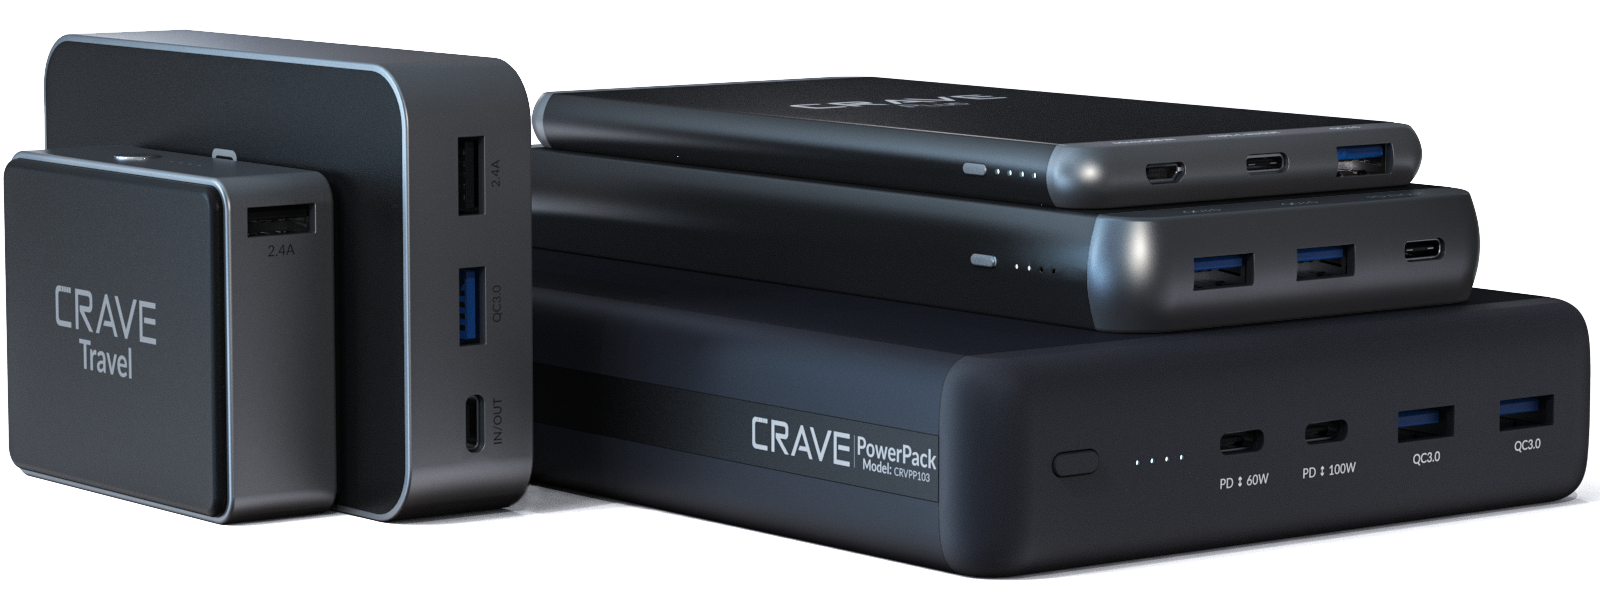 Are Power Banks Safe? - Crave Direct